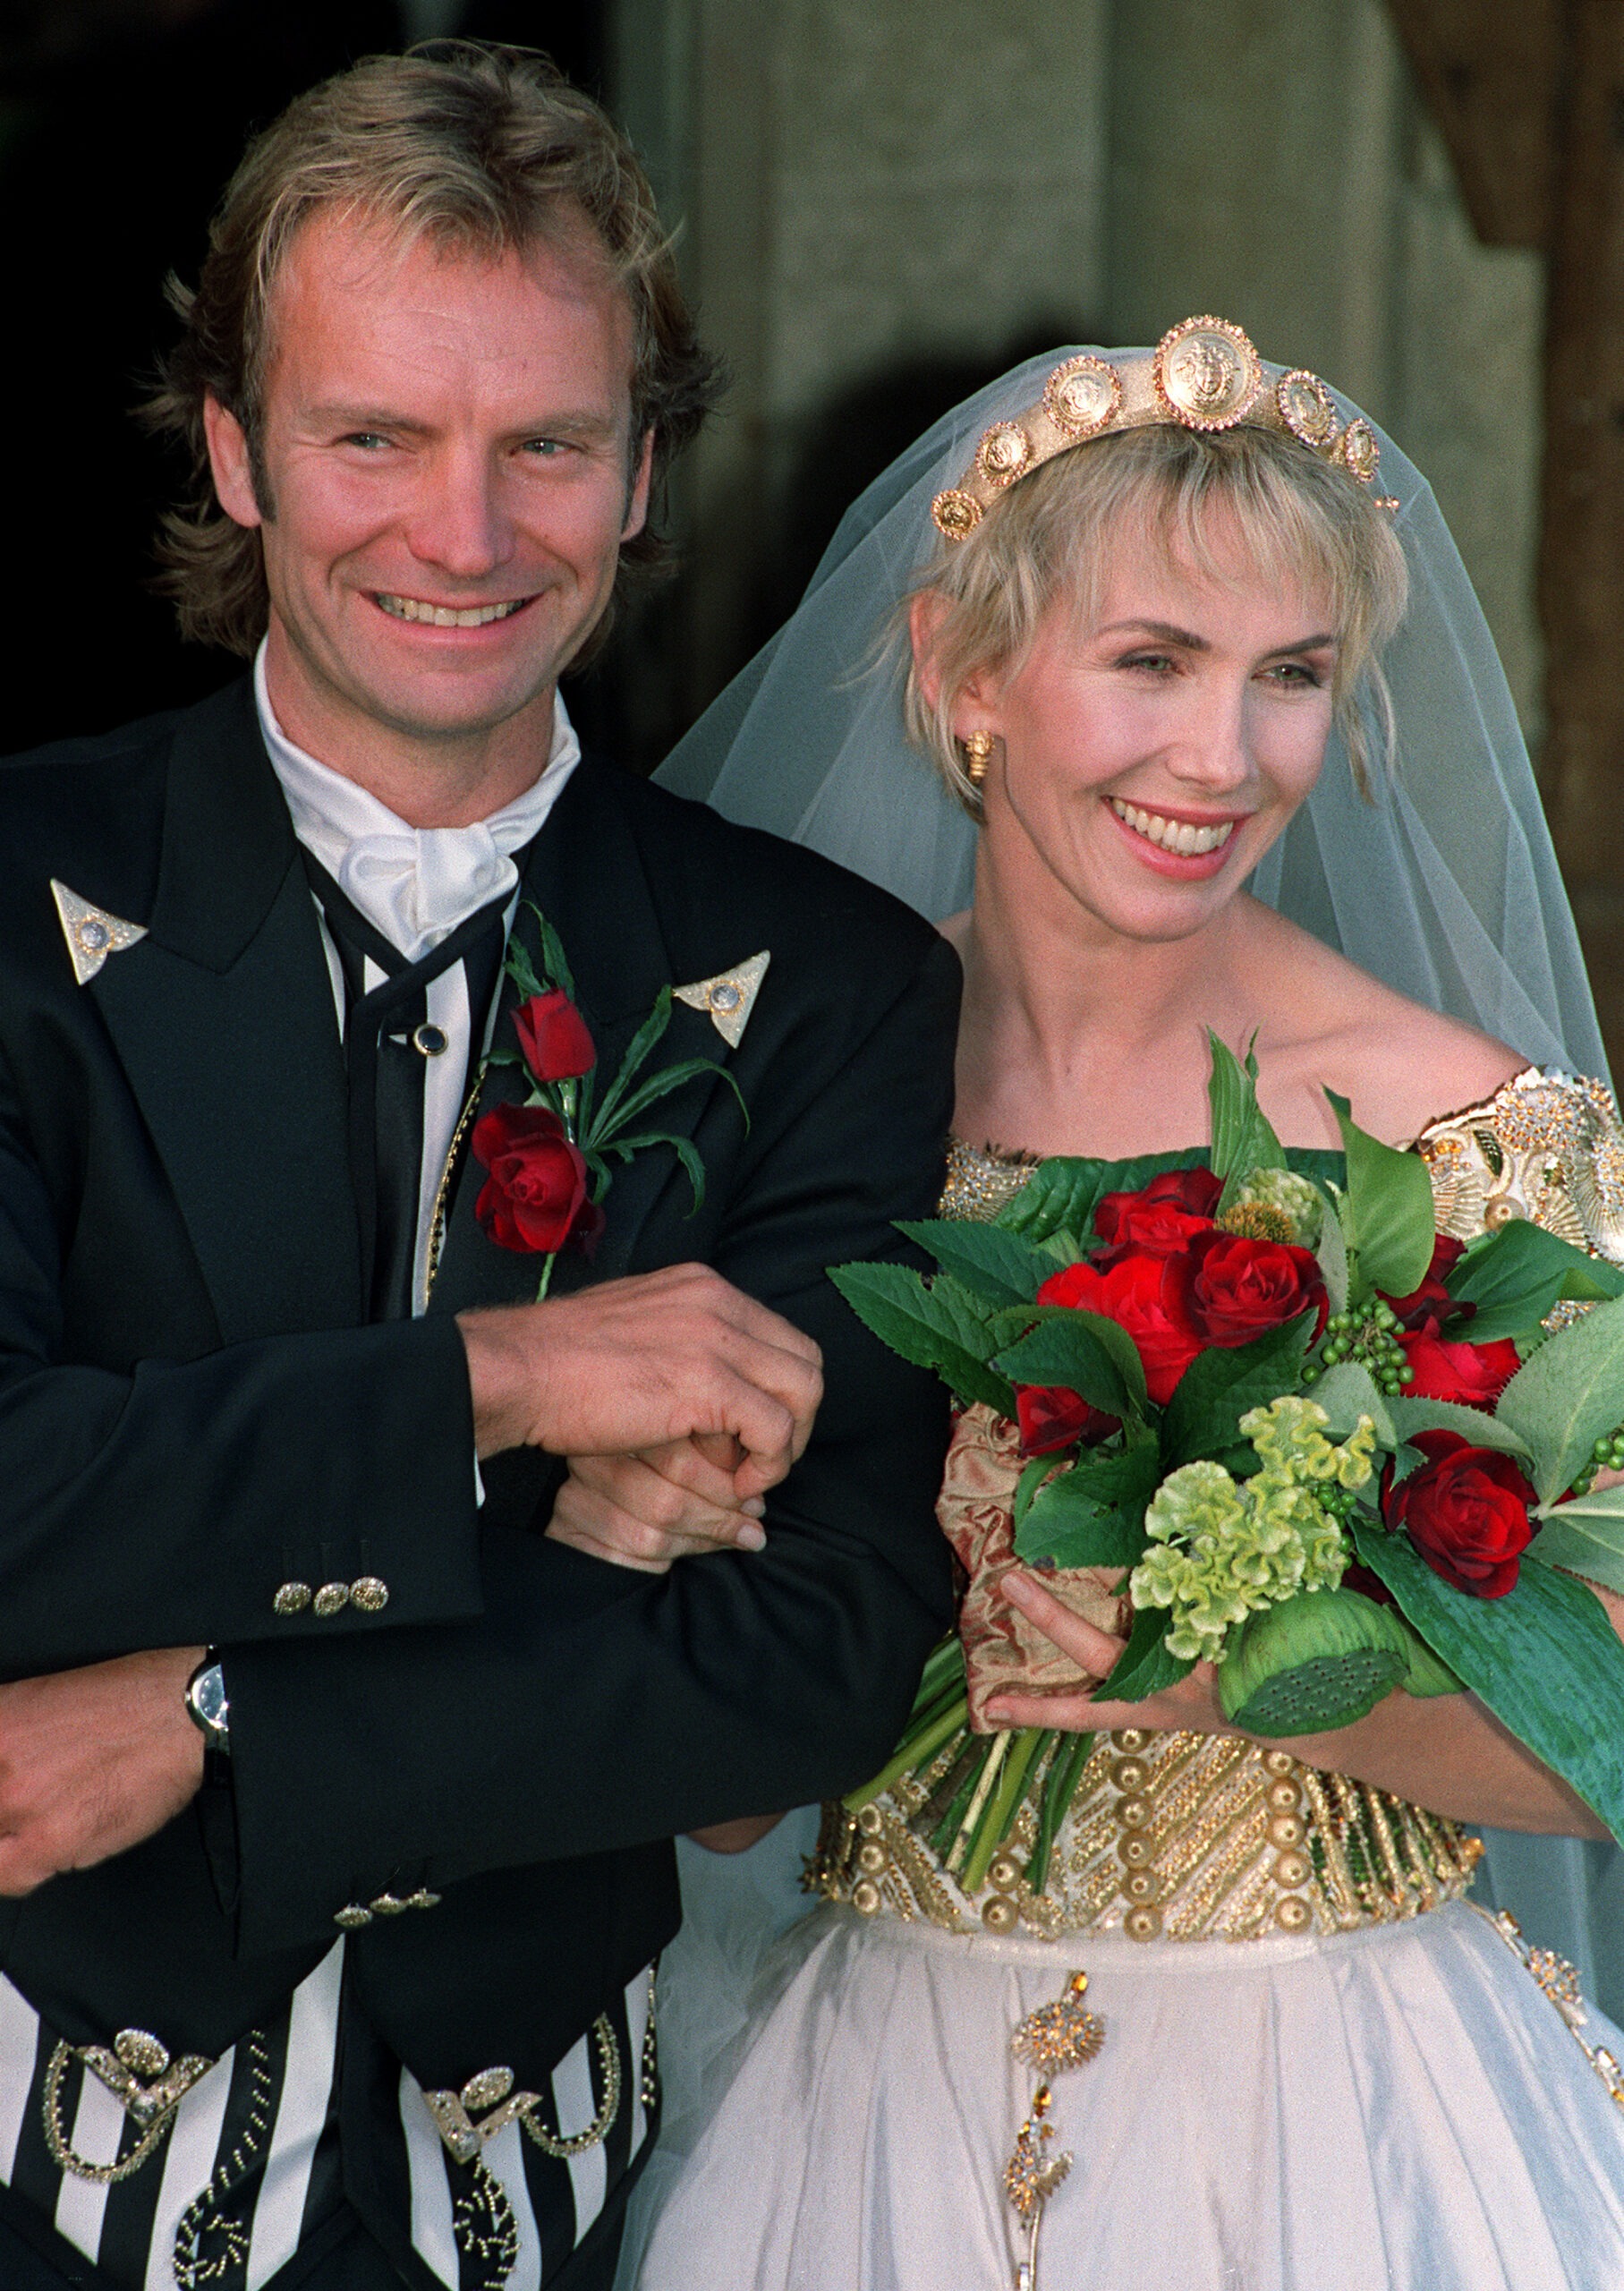 Sting and Trudie Styler on their wedding day at their village church in Great Durnford, Whitshire on August 20, 1992 in England. | Source: Getty Images